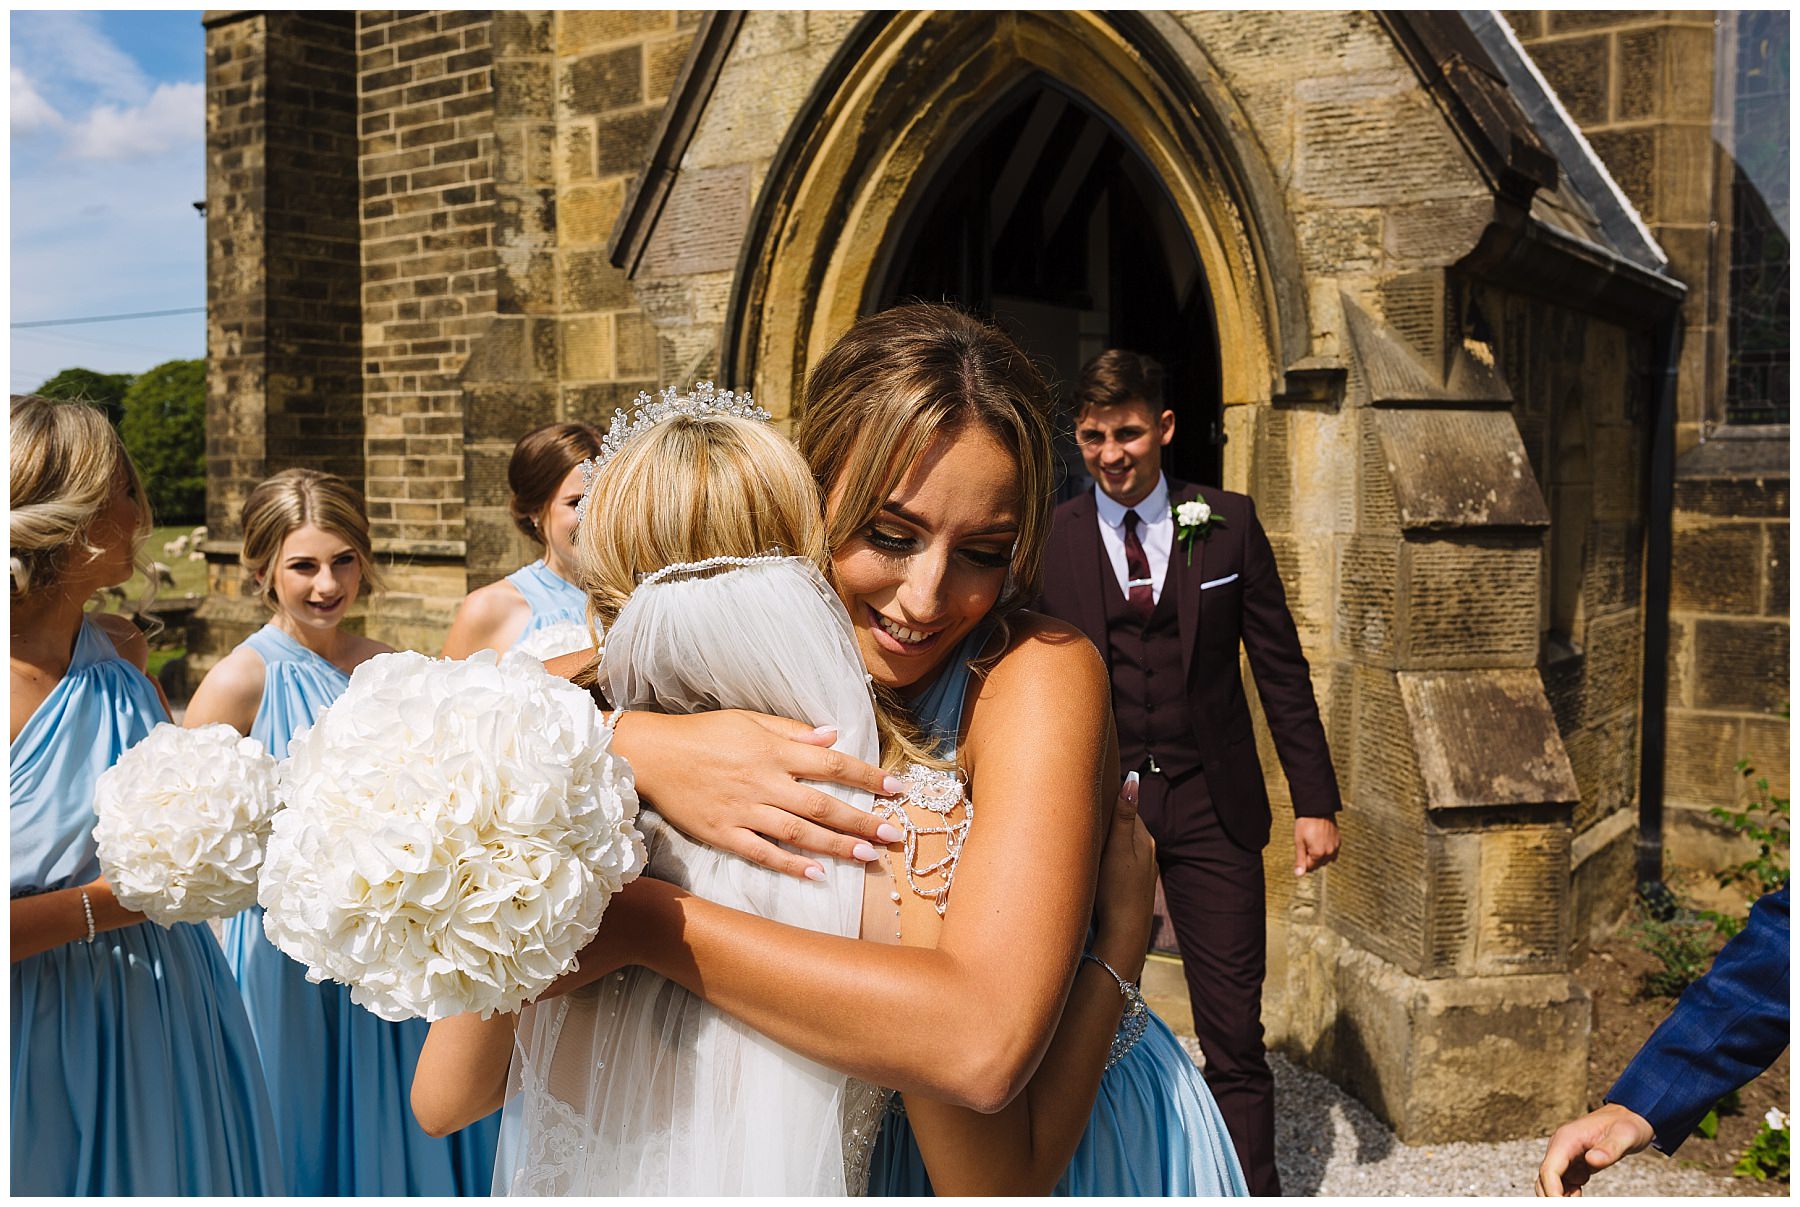 hugs and celebrations with newly weds outside church